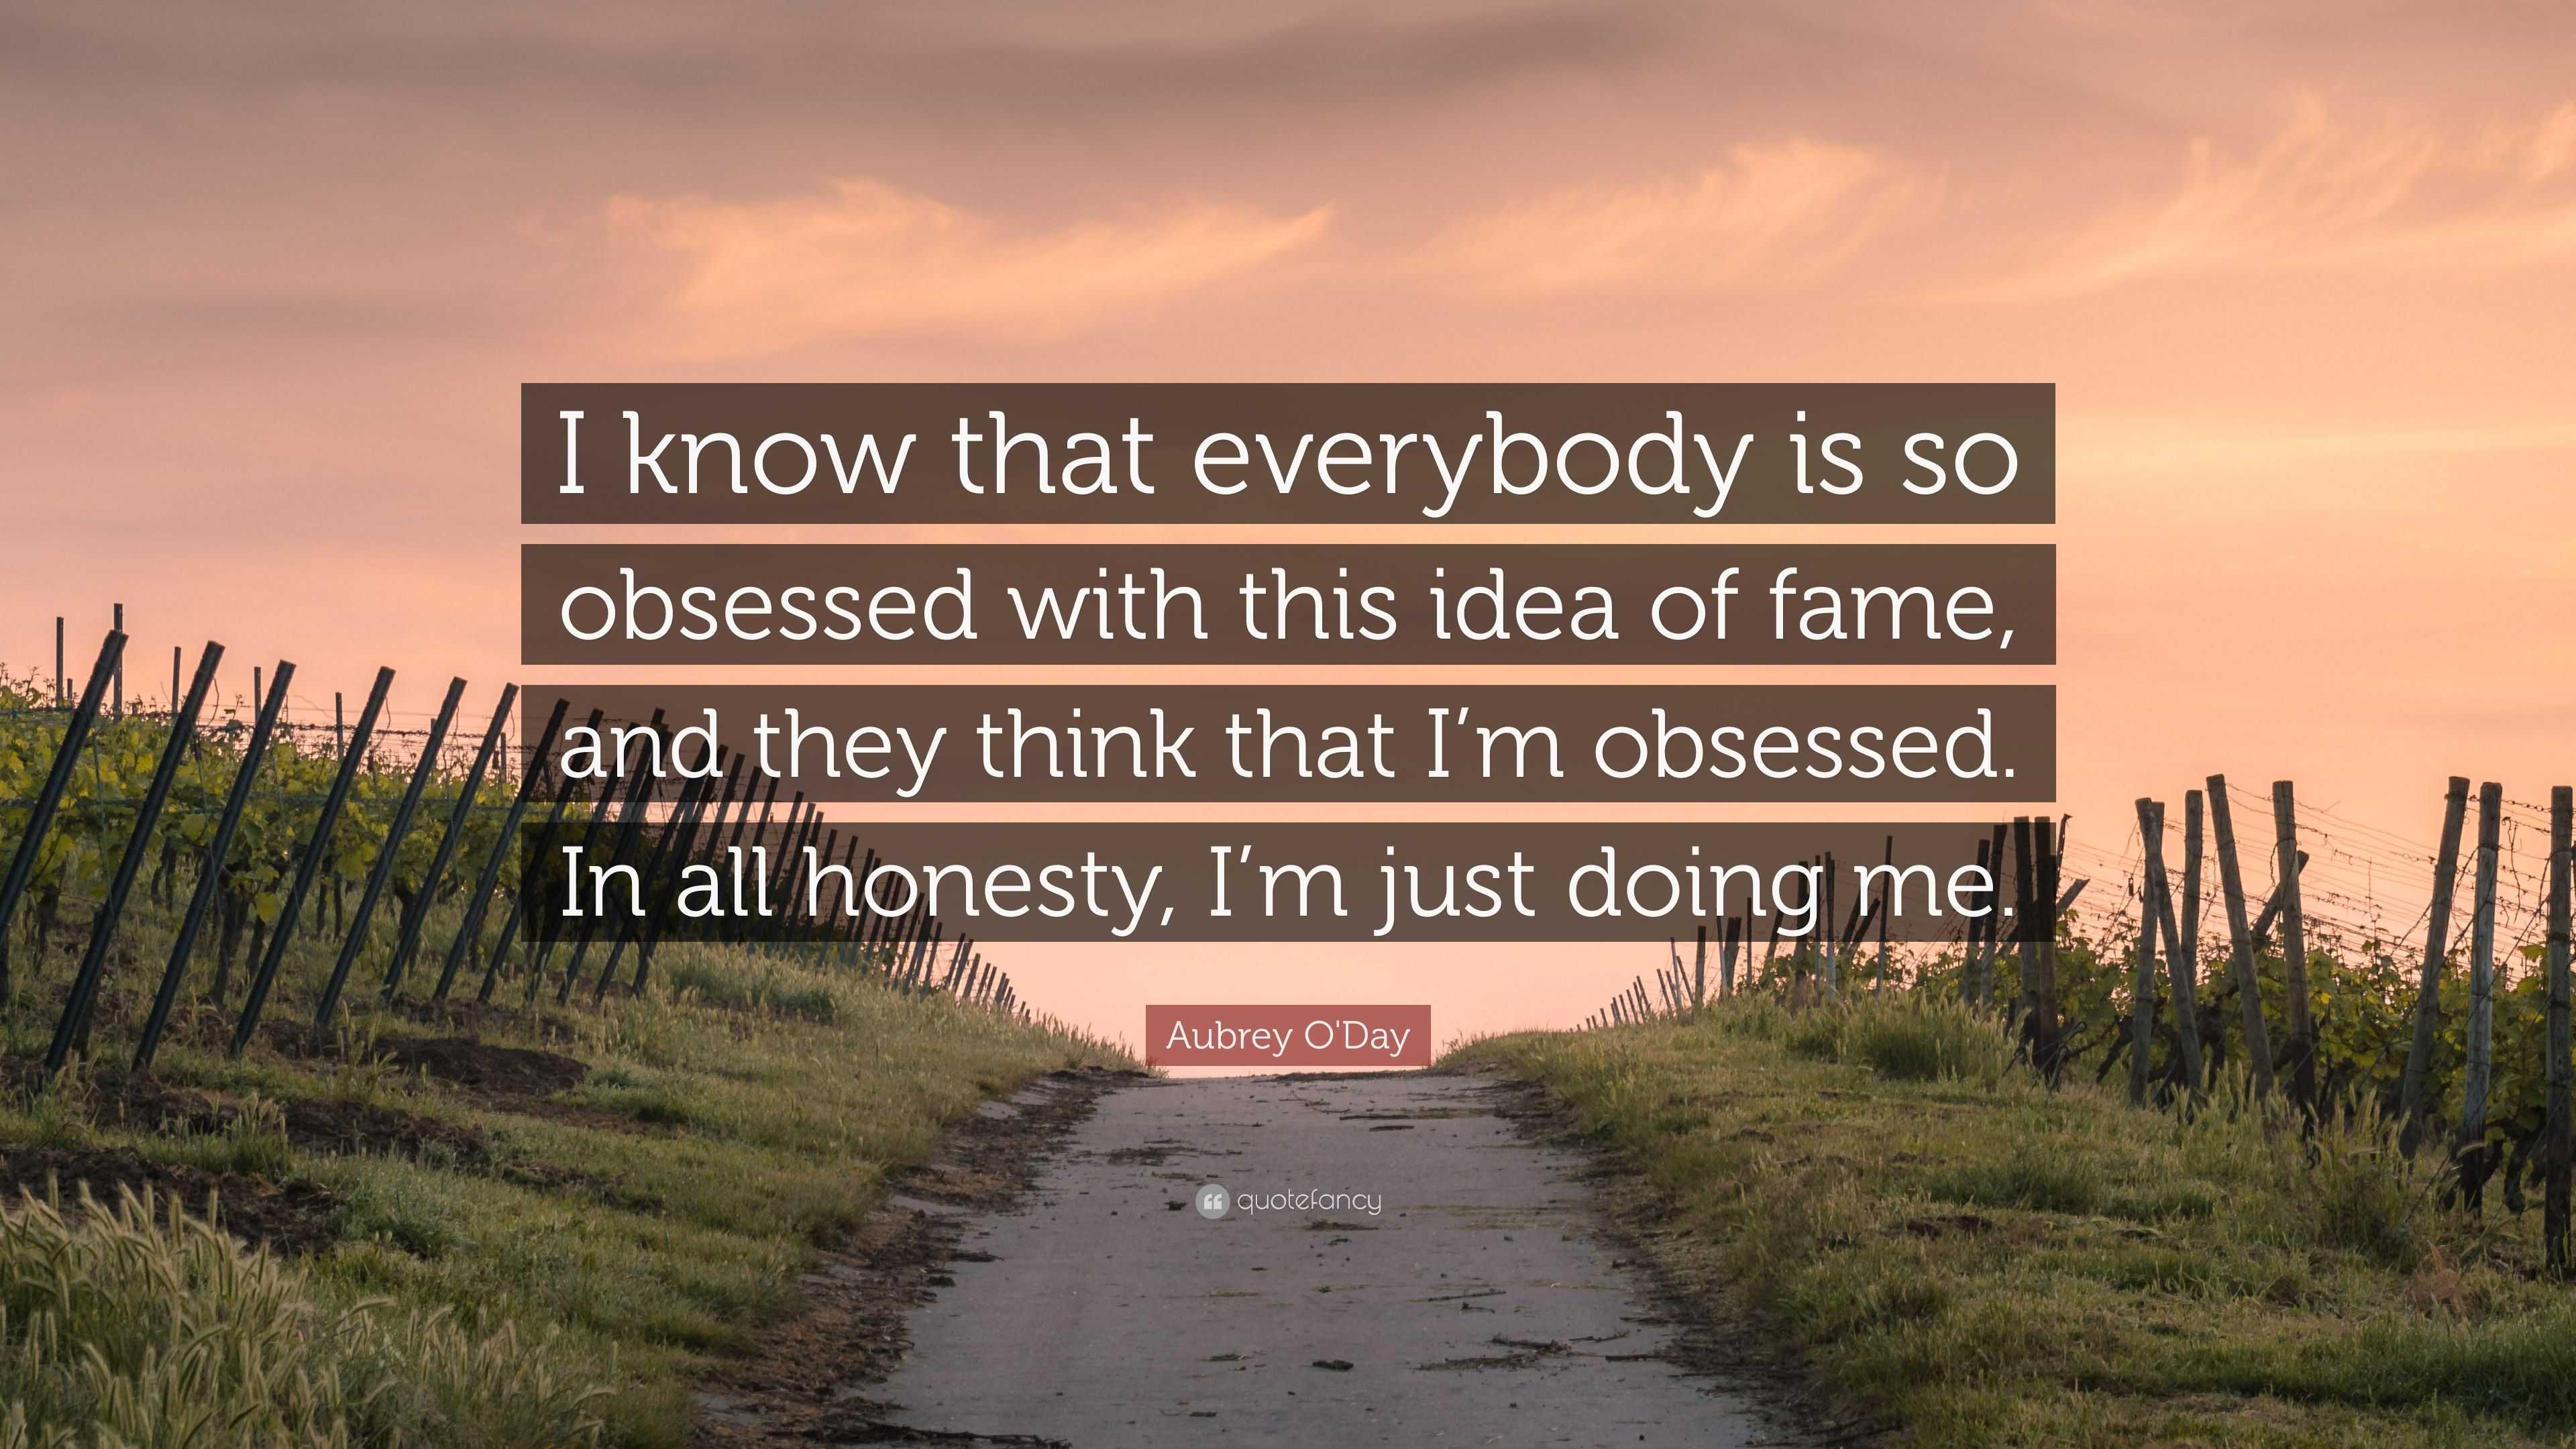 Aubrey O'Day Quote: “I know that everybody is so obsessed with